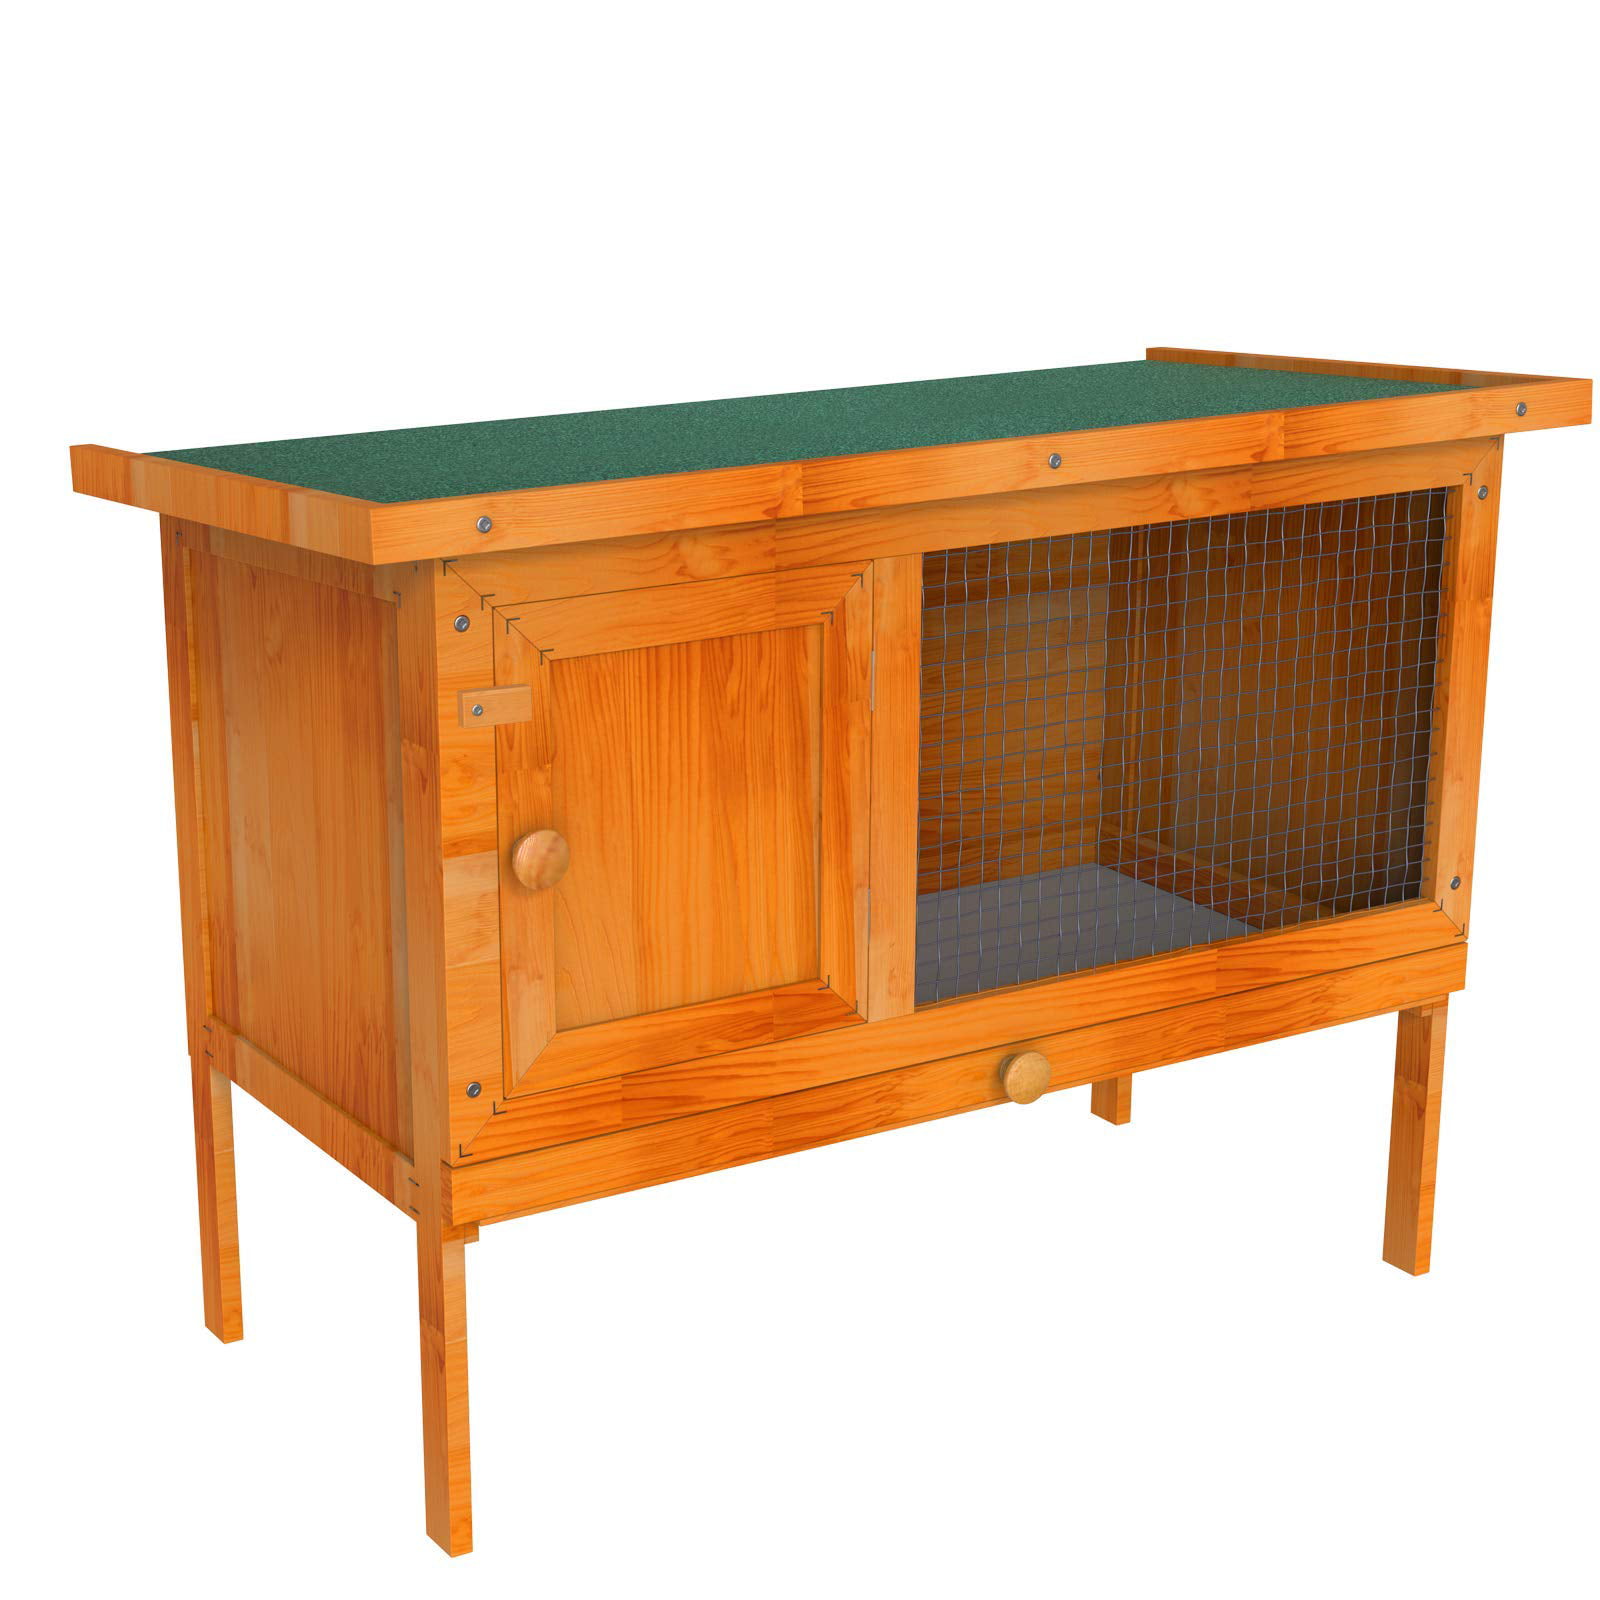 Nesting Box Waterproof Hen House Pet Poultry Cage Garden Backyard Nurxiovo 36 inches Rabbit Hutch Outdoor Wooden Bunny Cage with Pull Out Tray Single Deck & Ventilation Door 